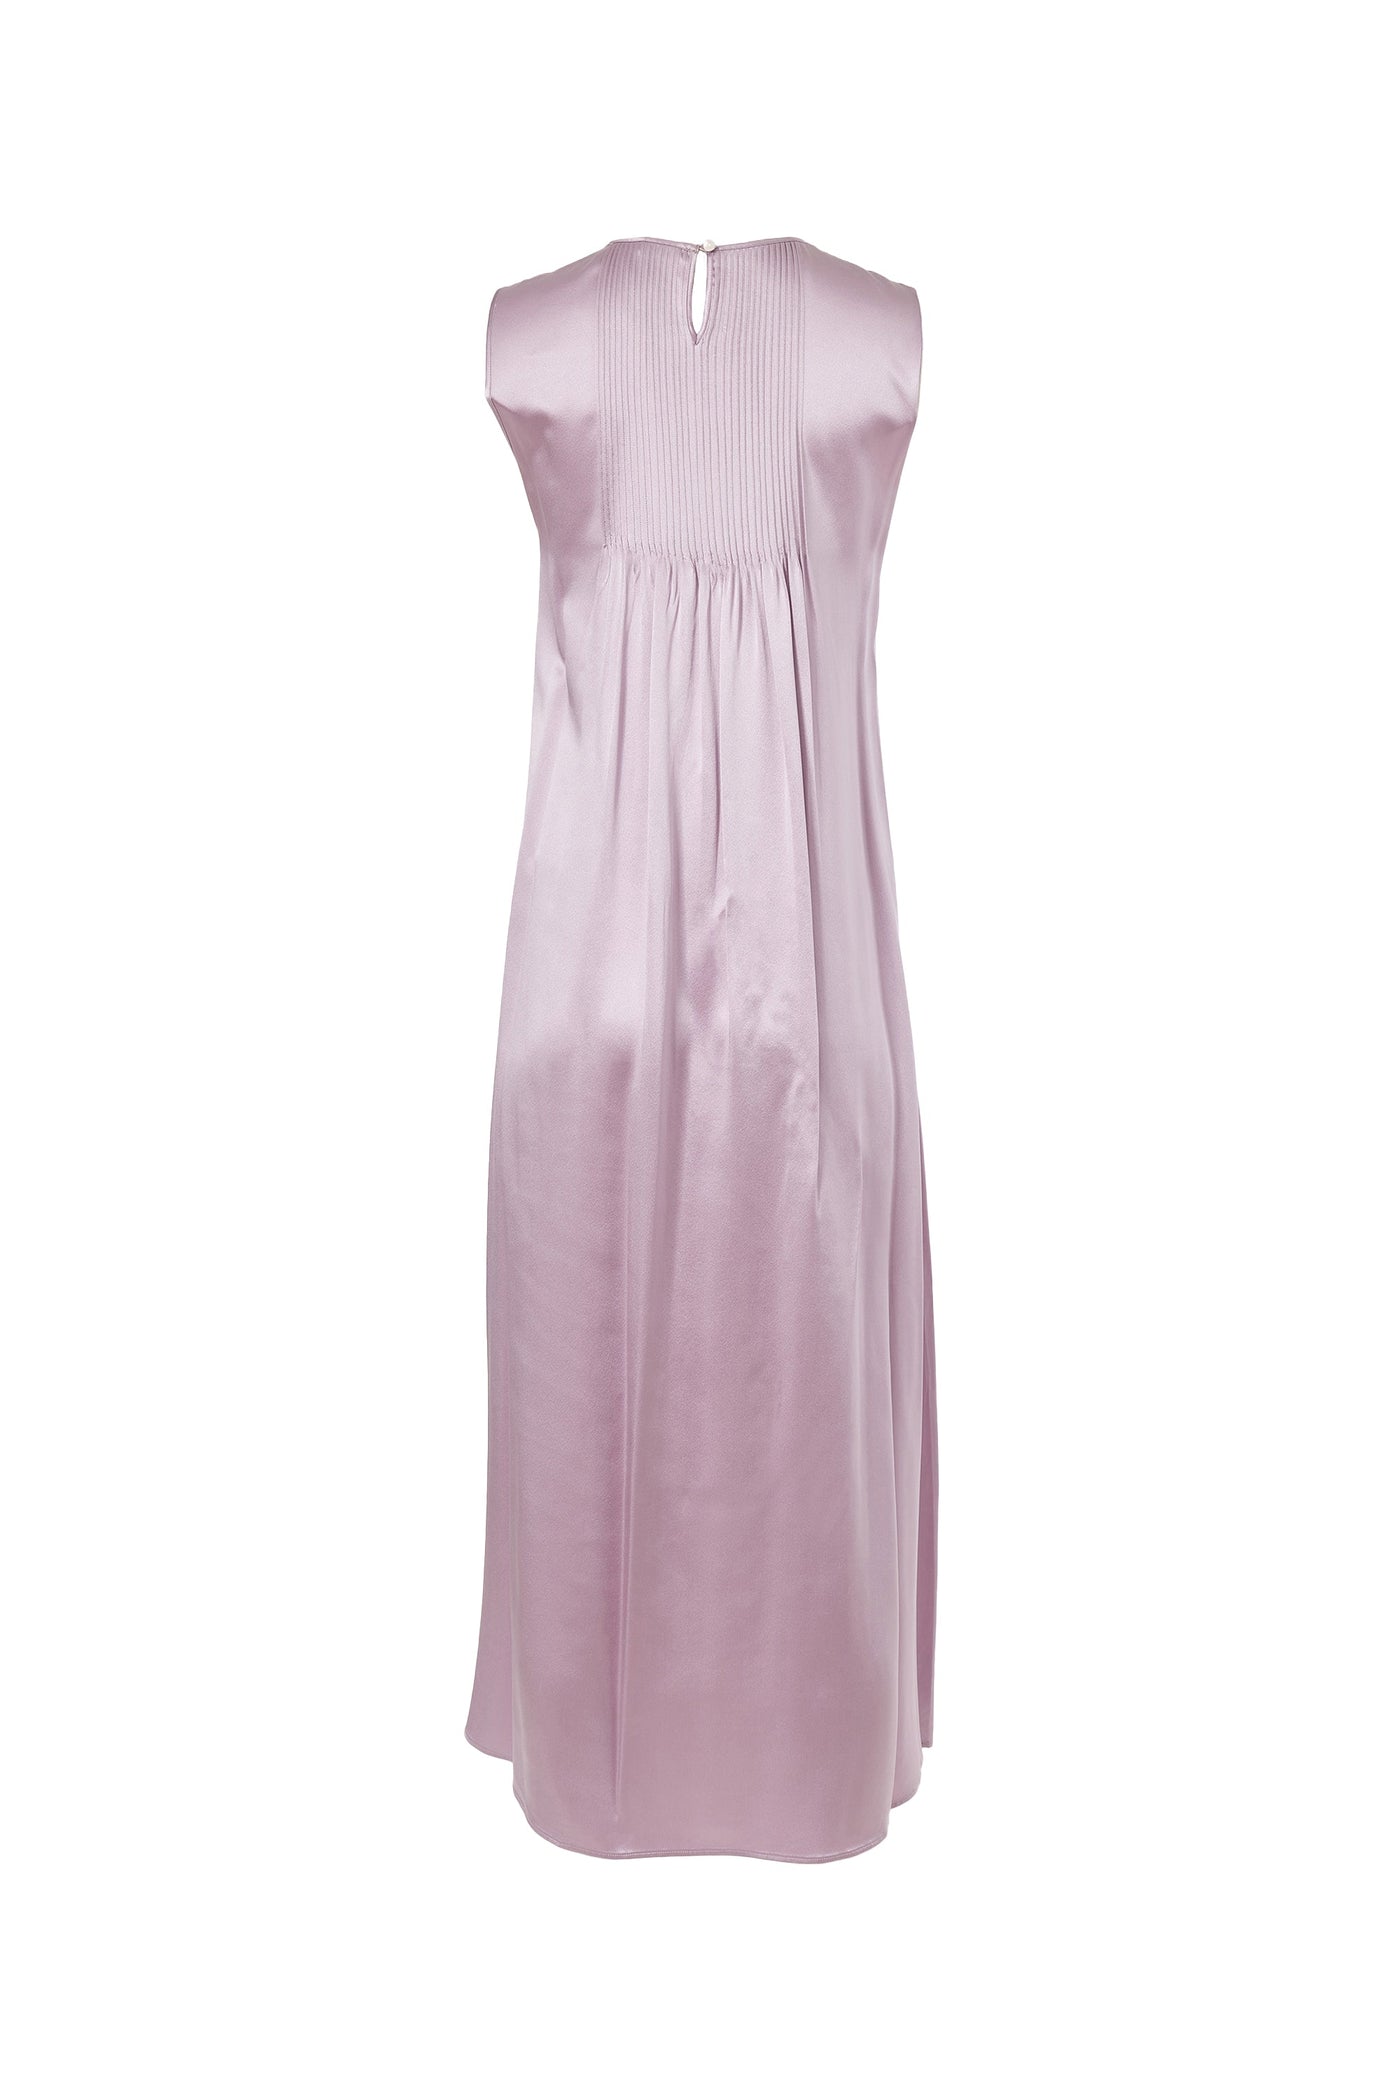 Long Flare Pleated Dress in Snow Lilac